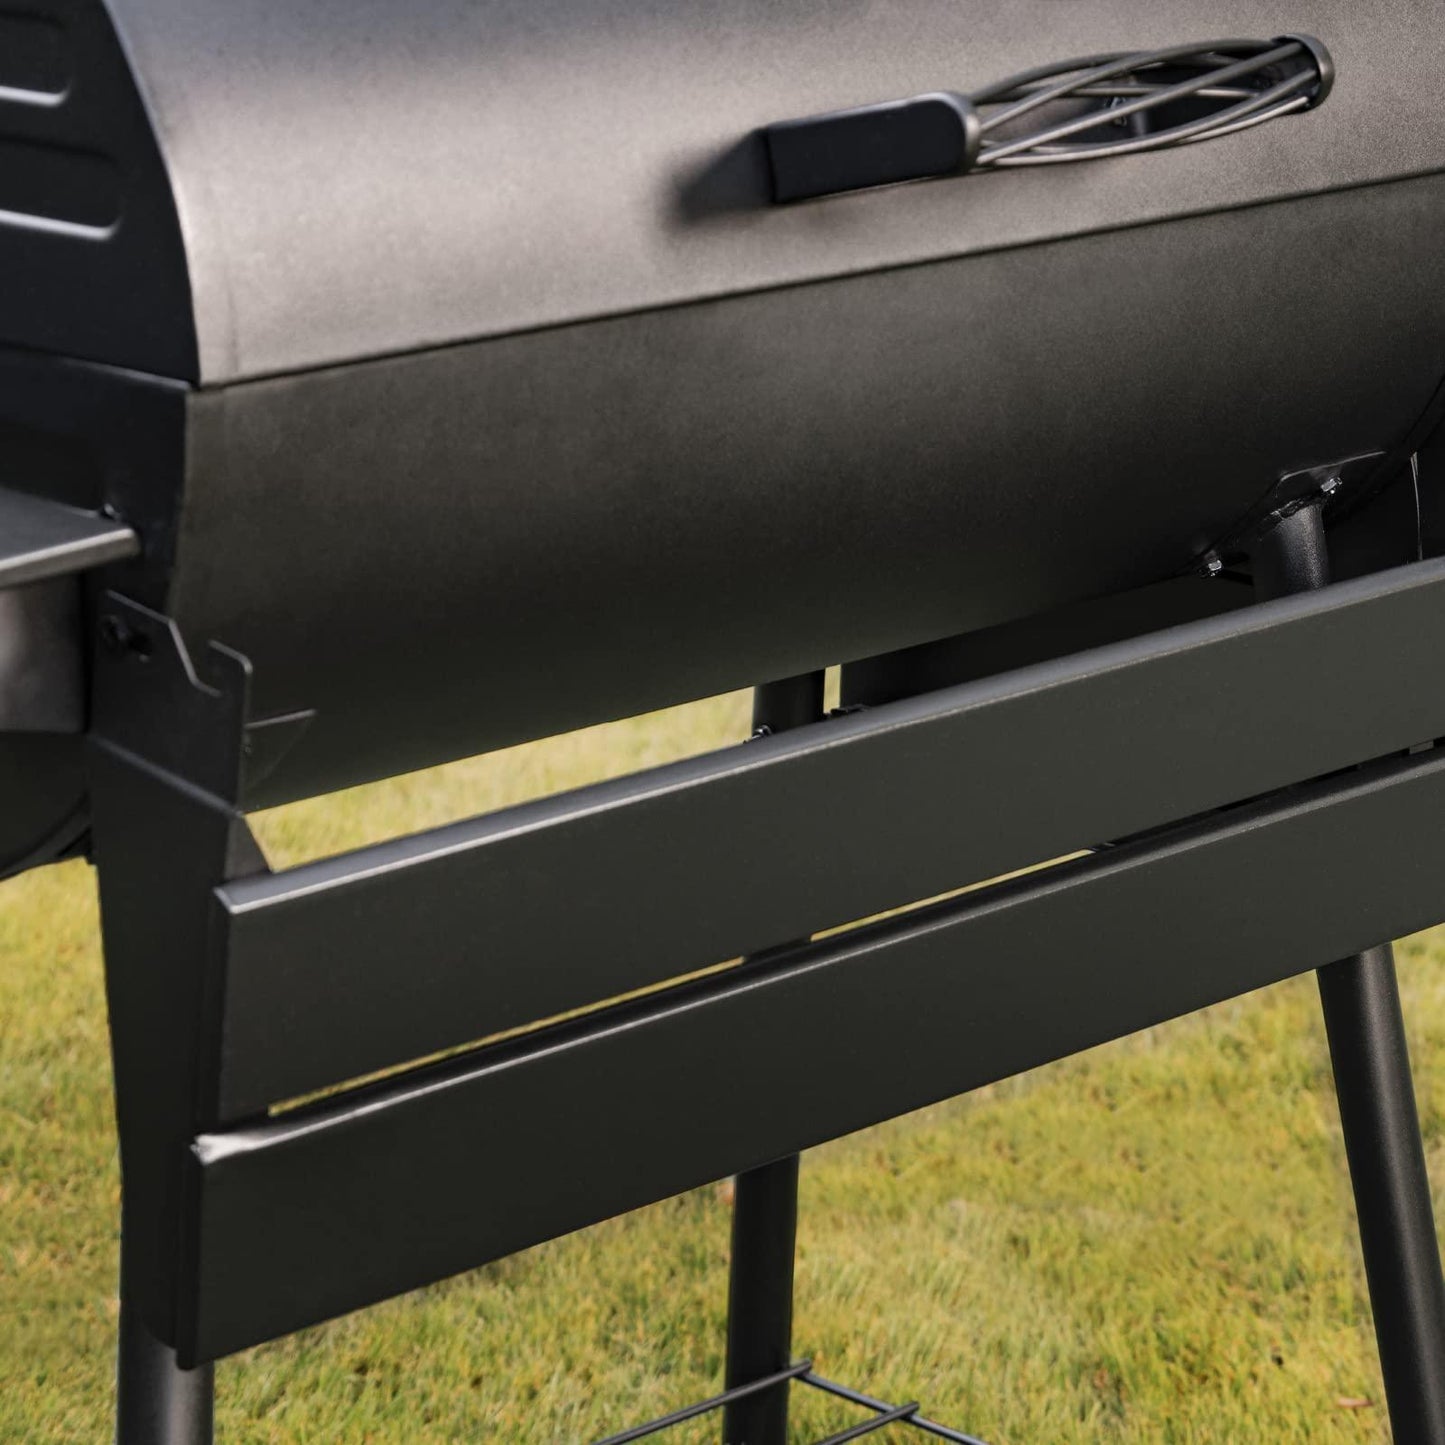 Char-Griller E3018 Smokin' Ace Charcoal Grill, Black - CookCave